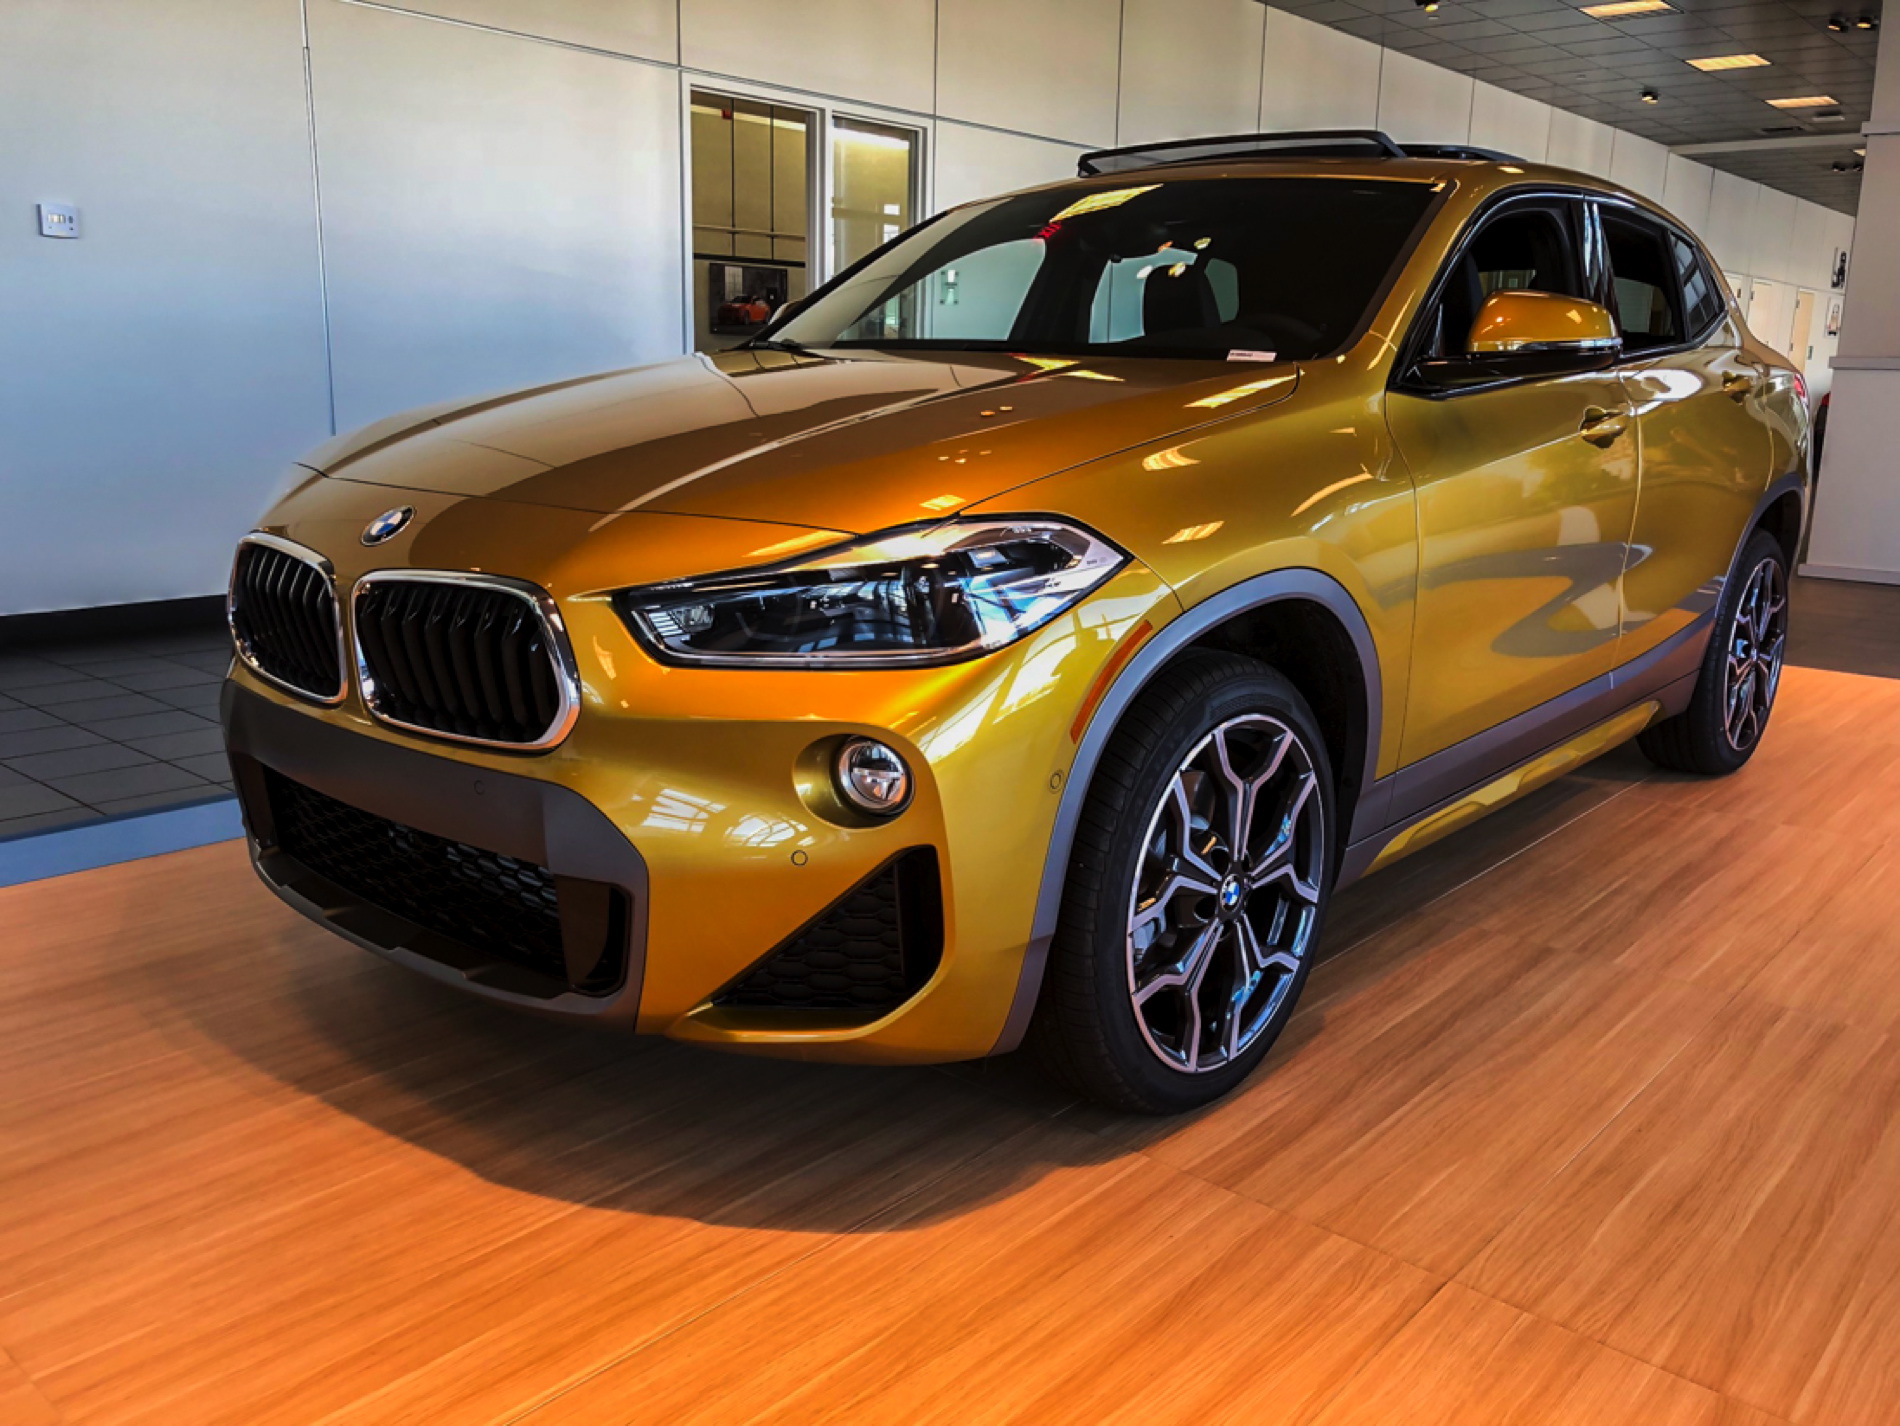 The Future Is Now: The 2016 BMW X2 Concept